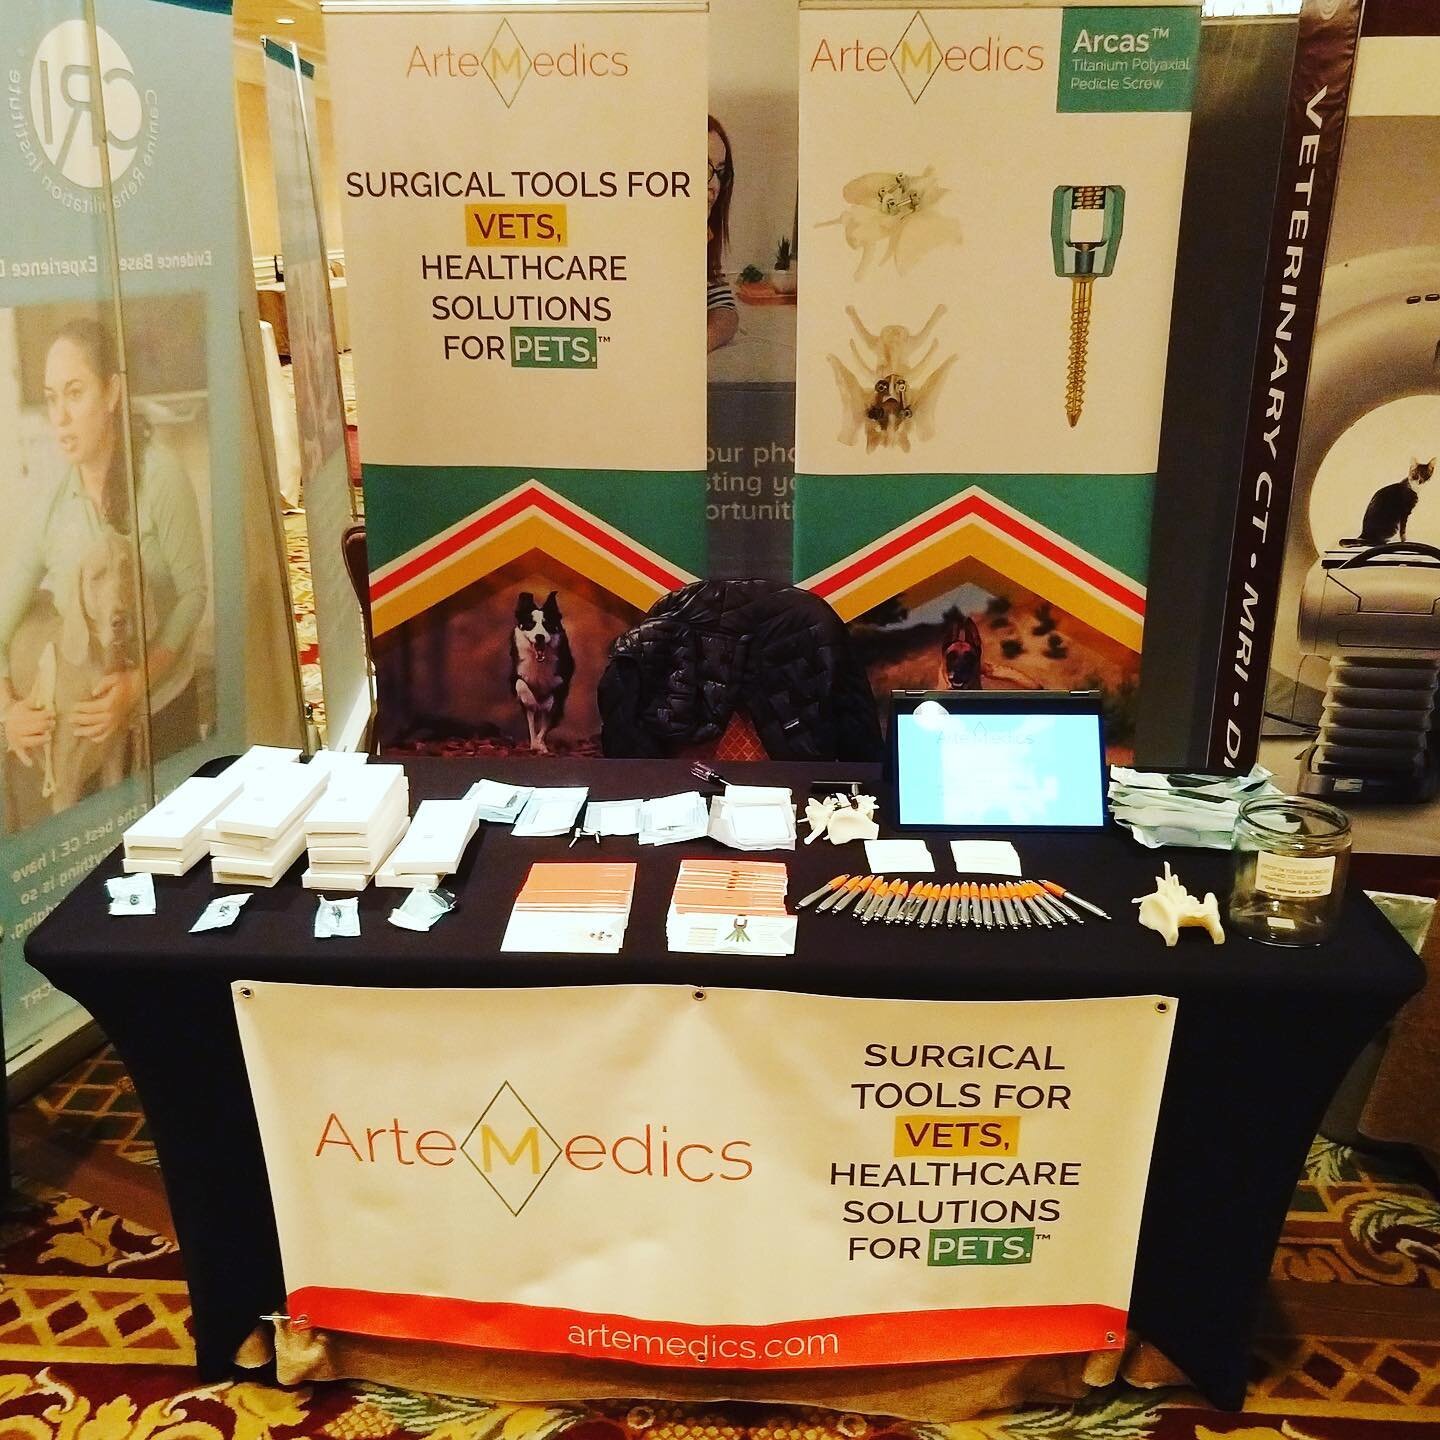 Stop by our booth at the Veterinary Orthopedic Society Conference! We have daily drawings for 3D printed canine spines and free shipping on products!